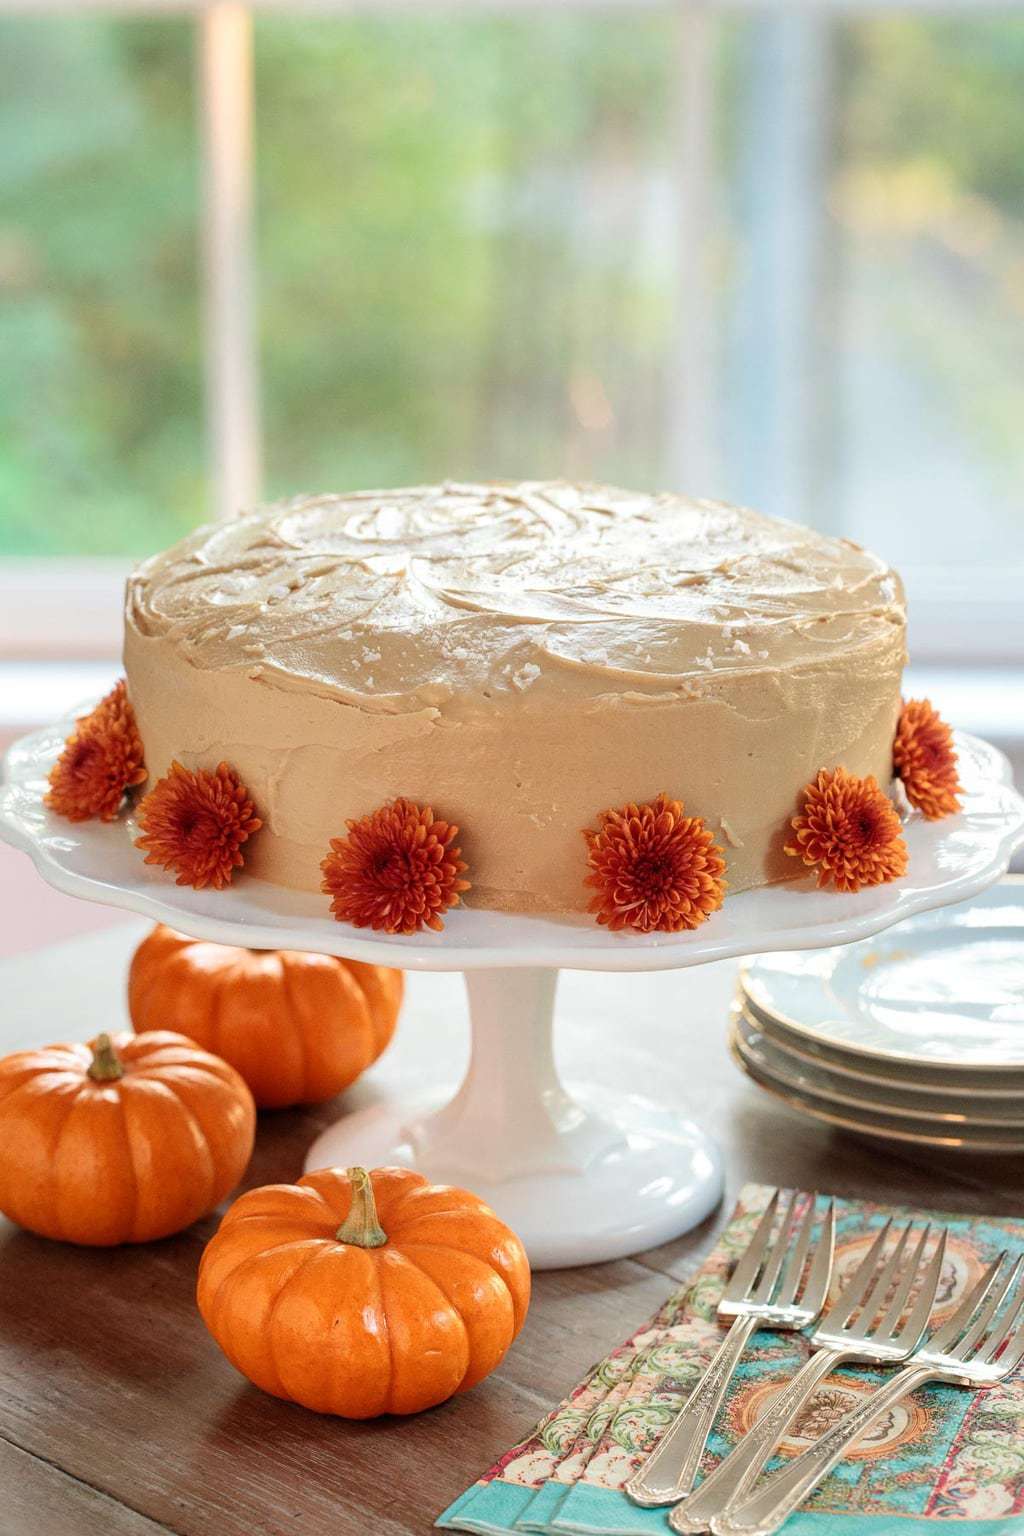 Photo of a One-Bowl Pumpkin Cake with Salted Caramel Icing on a white cake stand decorated with deep orange chrysanthemums.